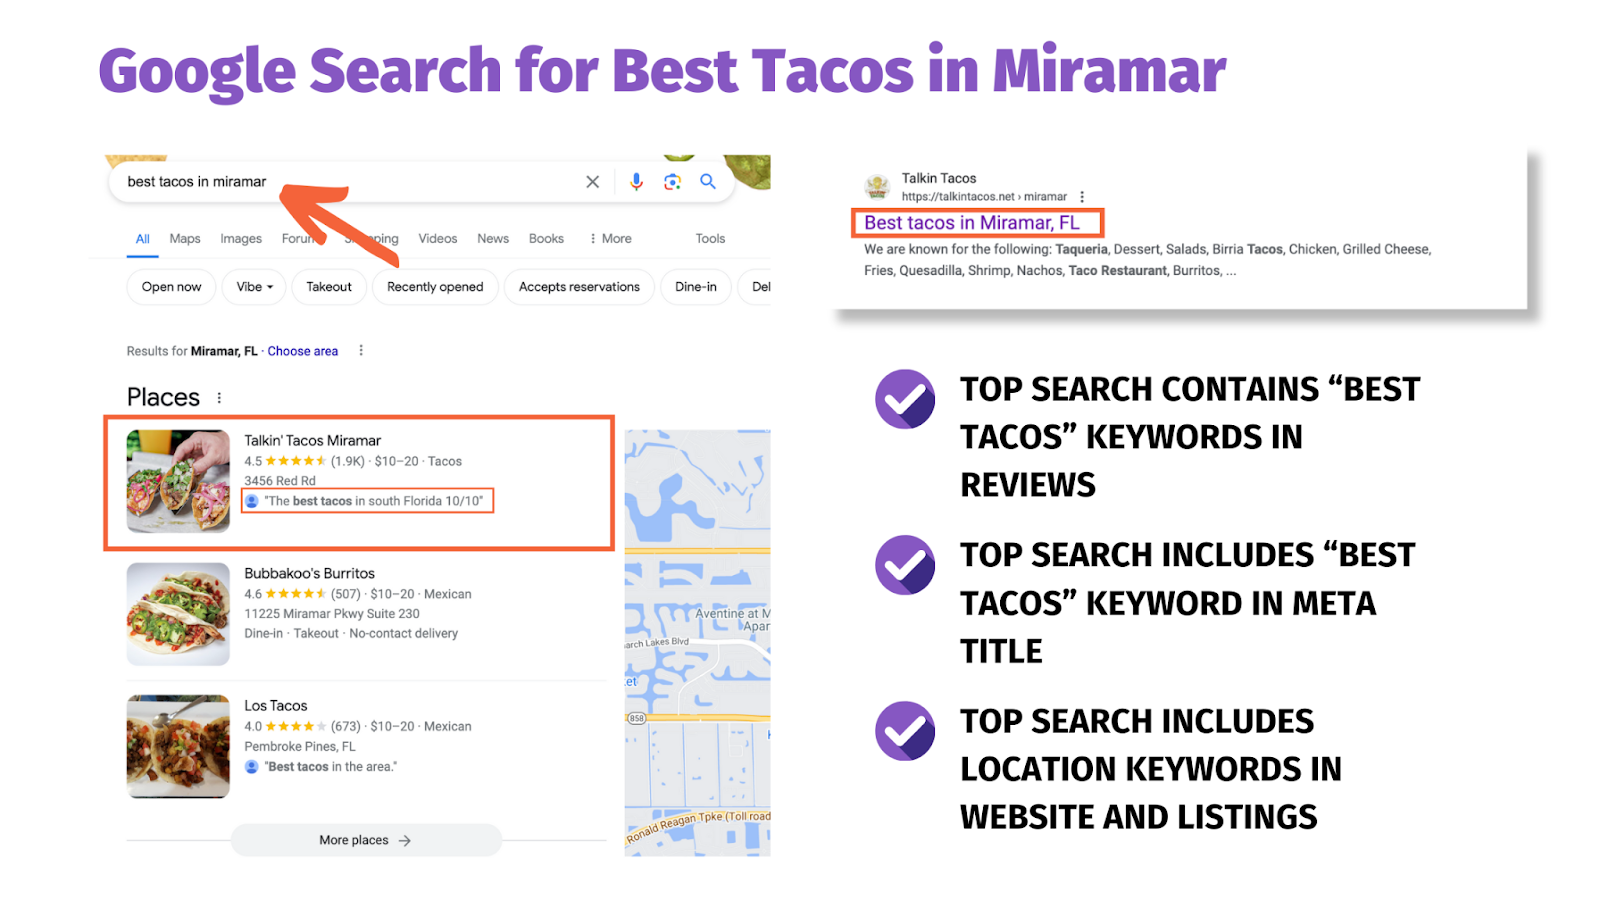 Google Search for Best Tacos in Miramar